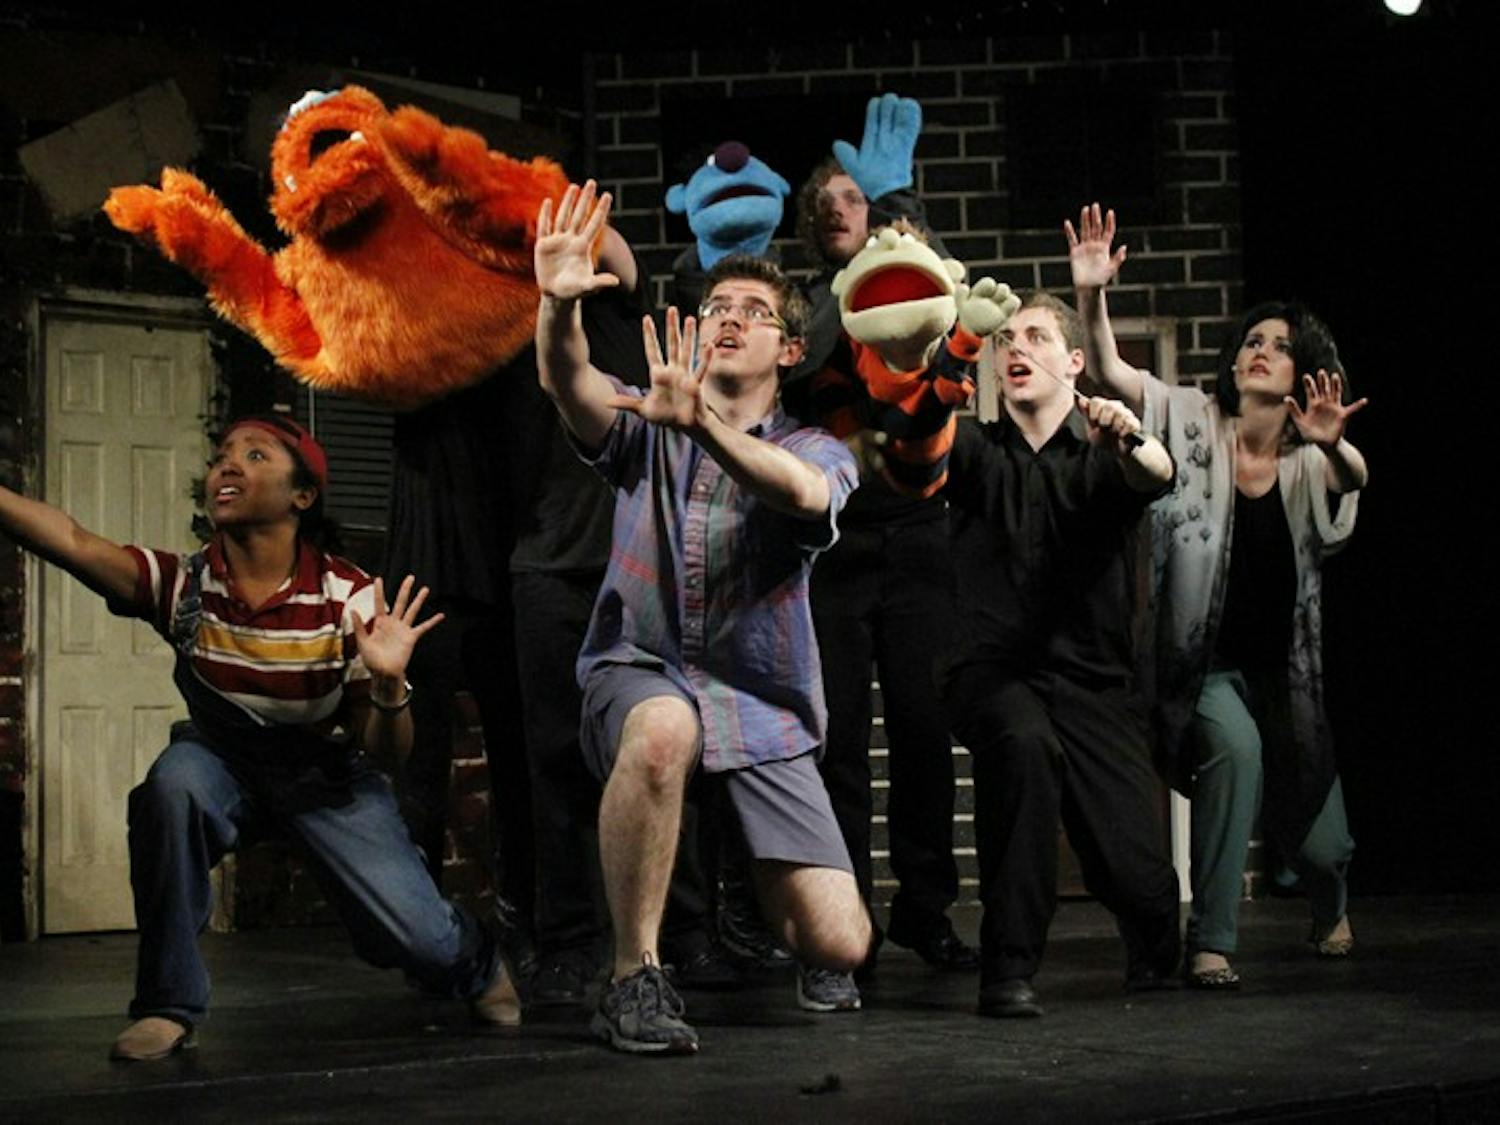 Student performers act out a musical scene during a dress rehearsal for Pauper Player's production of Avenue Q. The rehearsal took place at the Arts Center in Carrboro, Wednesday the 2nd of April.